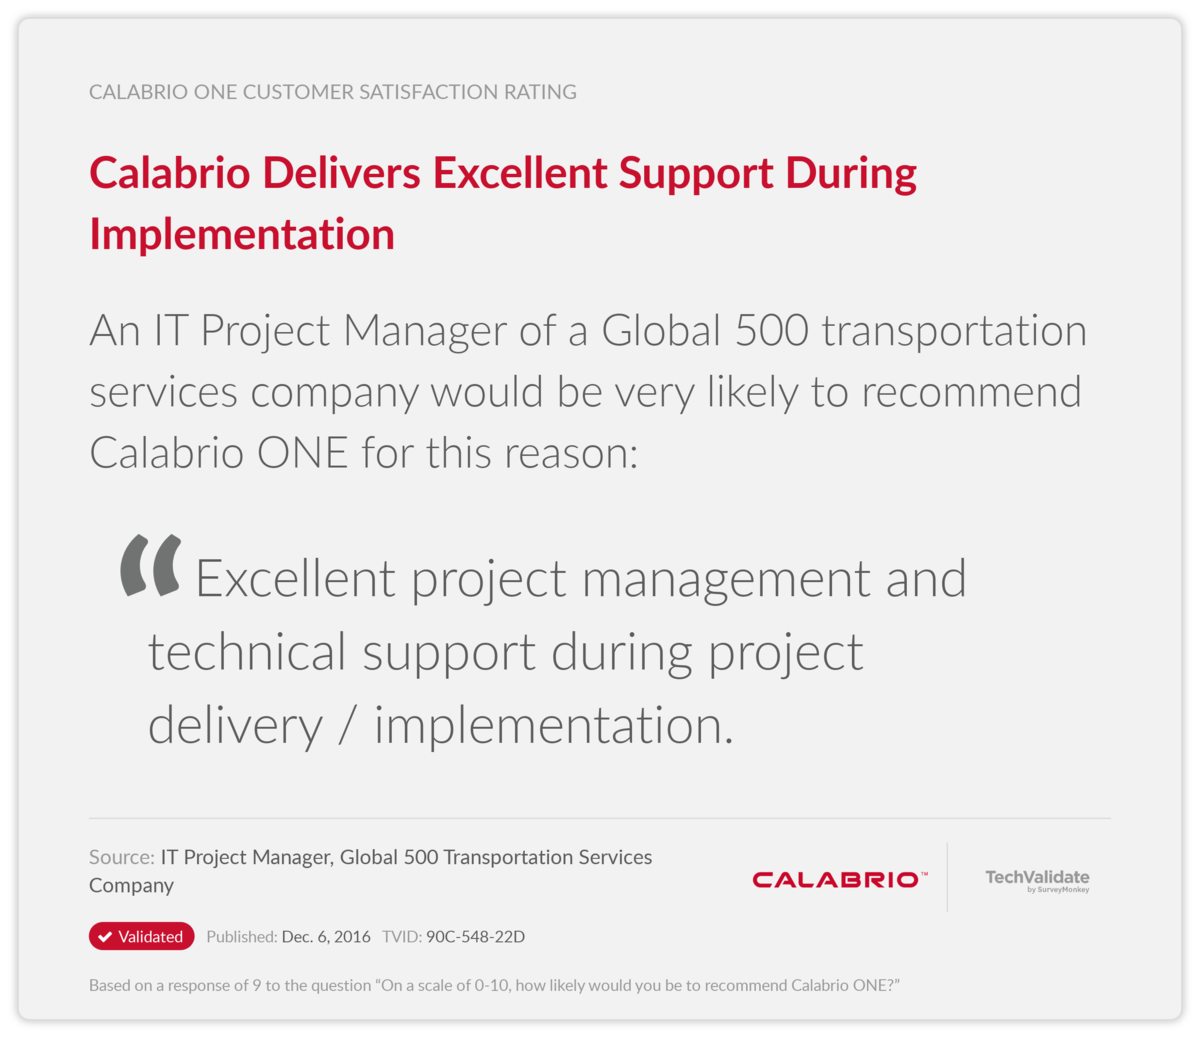 Calabrio Delivers Excellent Support During Implementation